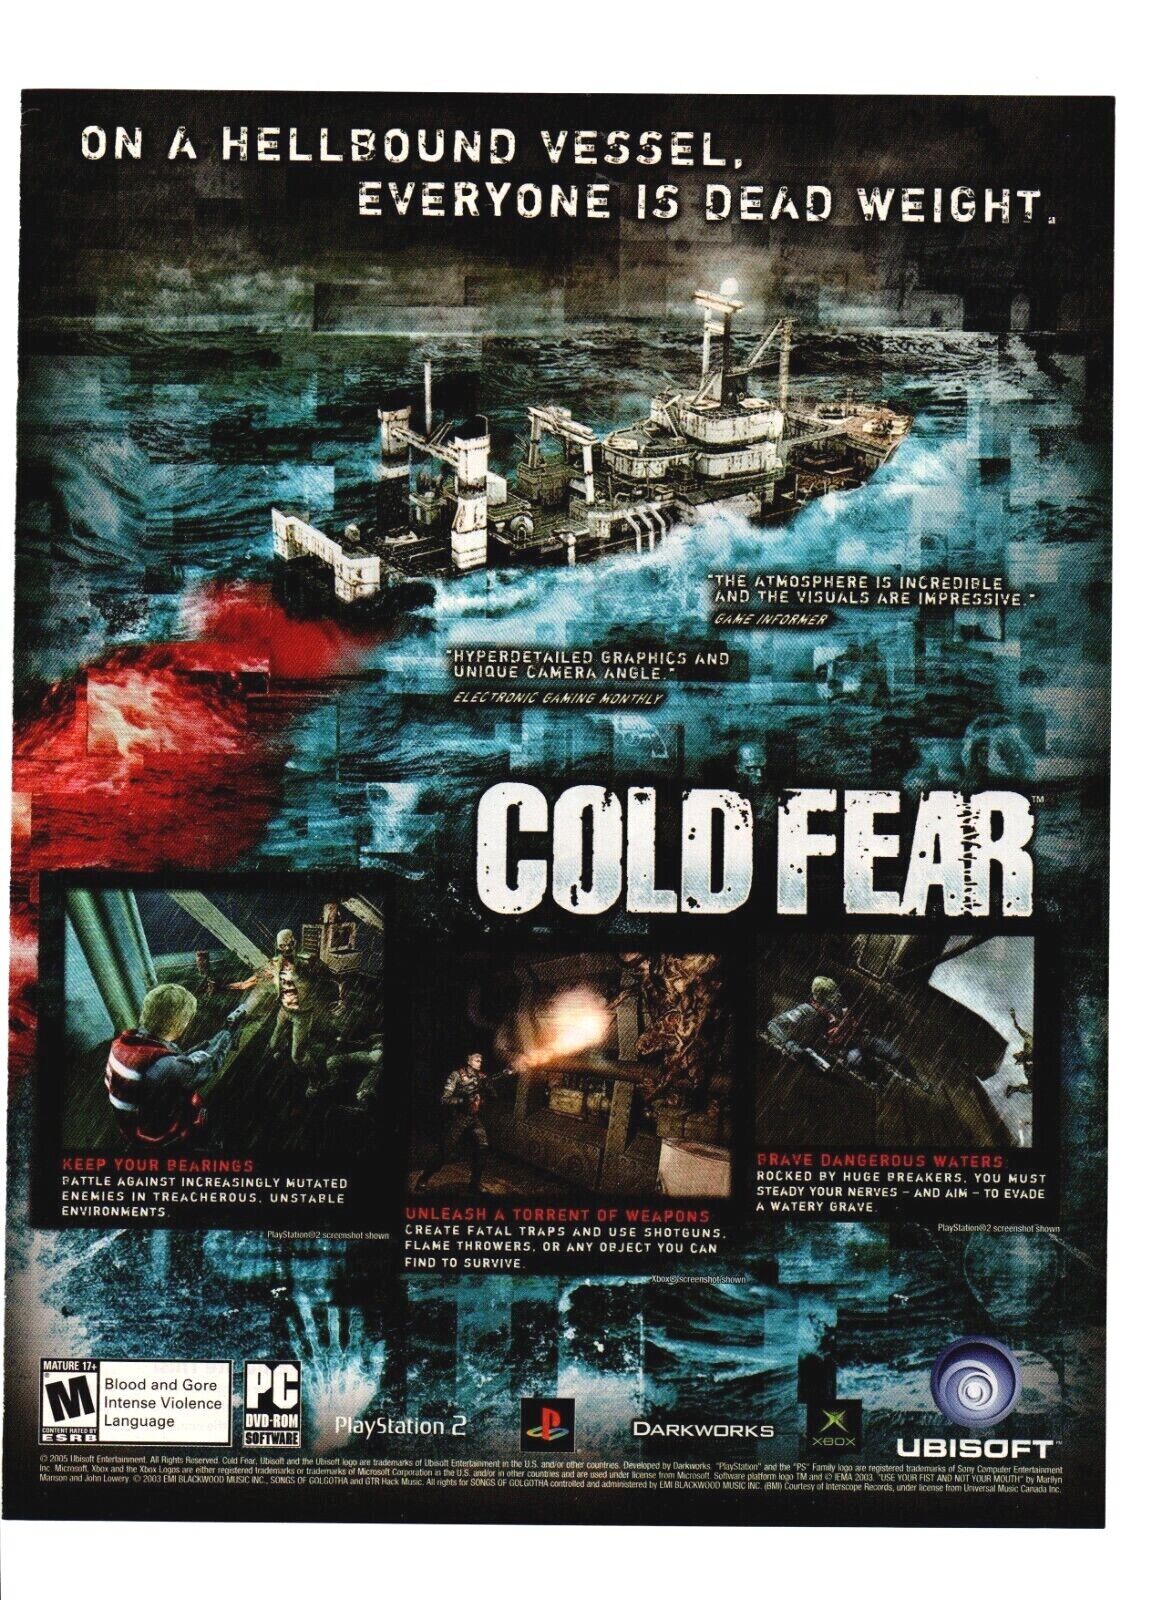 2005 Video Game PRINT AD ART - Cold Fear PC PS1 XBOX PS2 Everyone Is Dead Weight